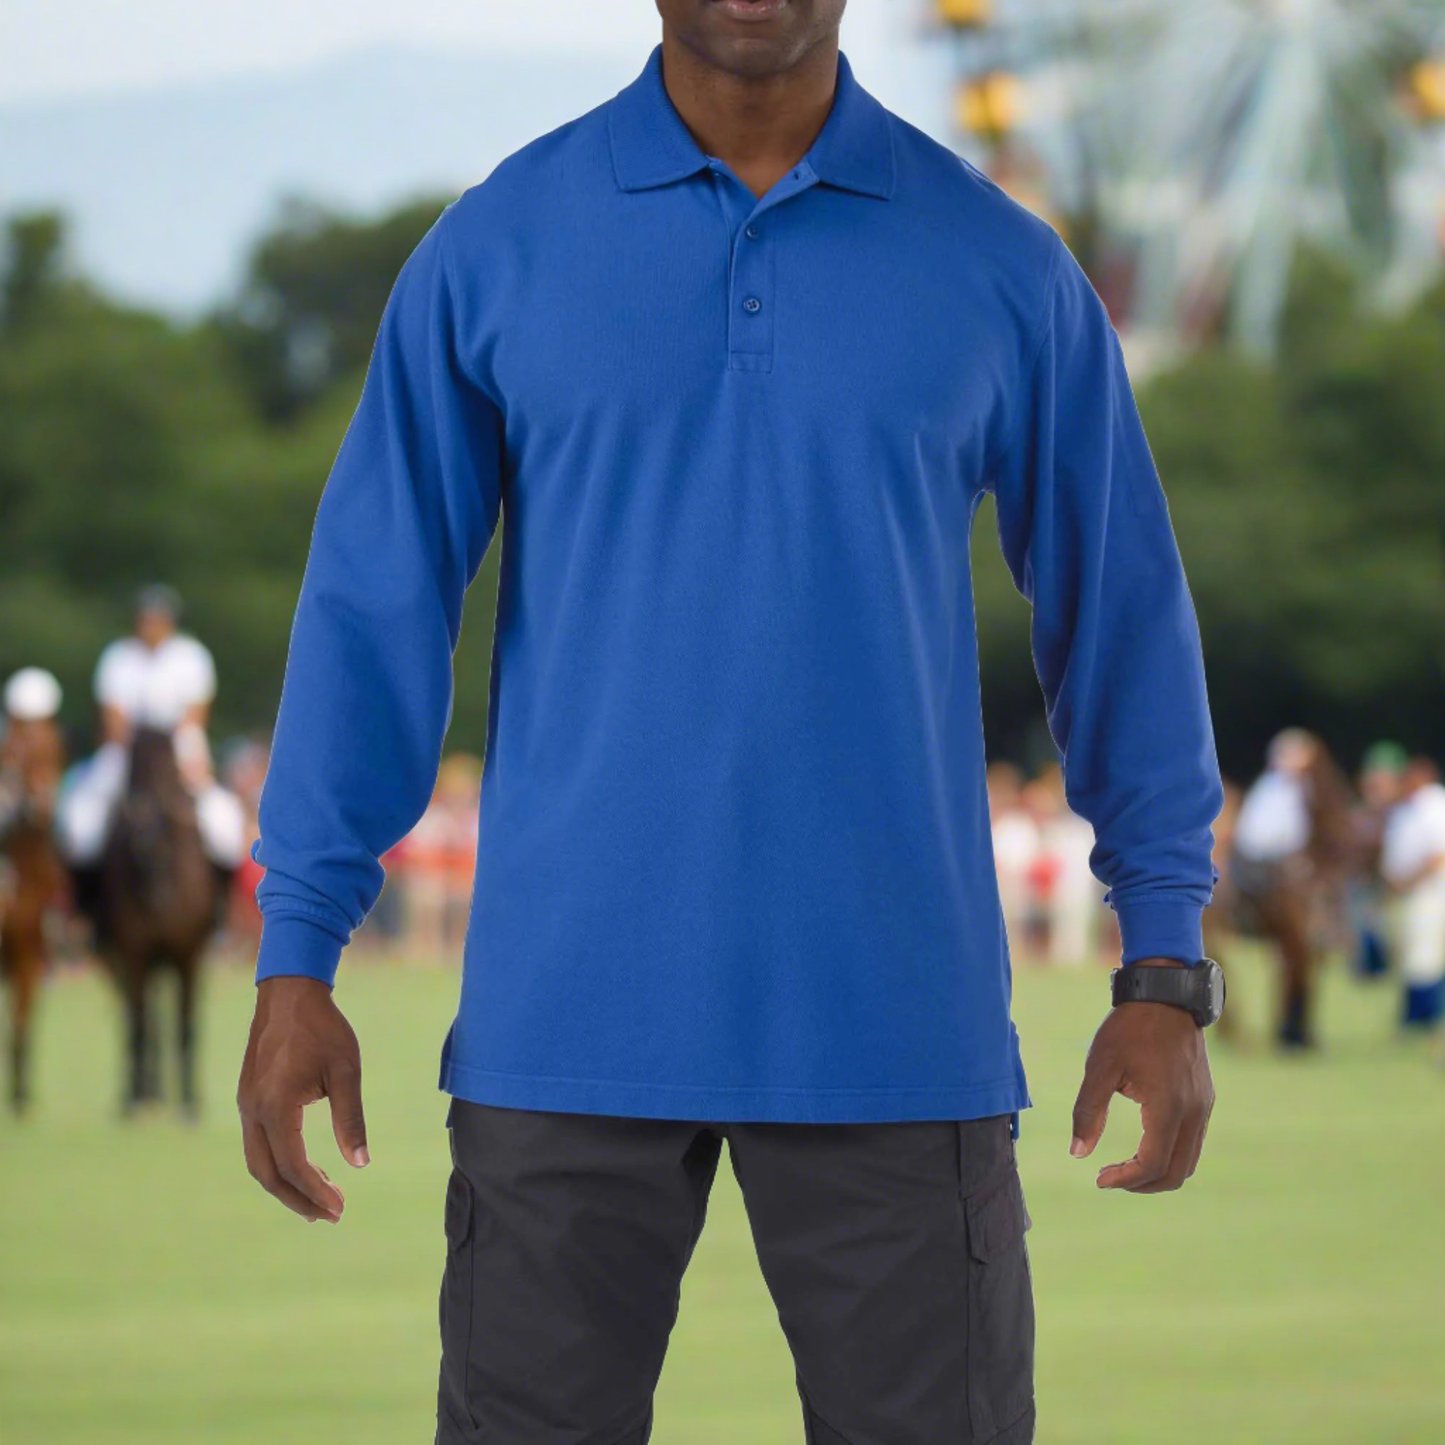 Tops - 5.11 Tactical Professional Long Sleeve Polo